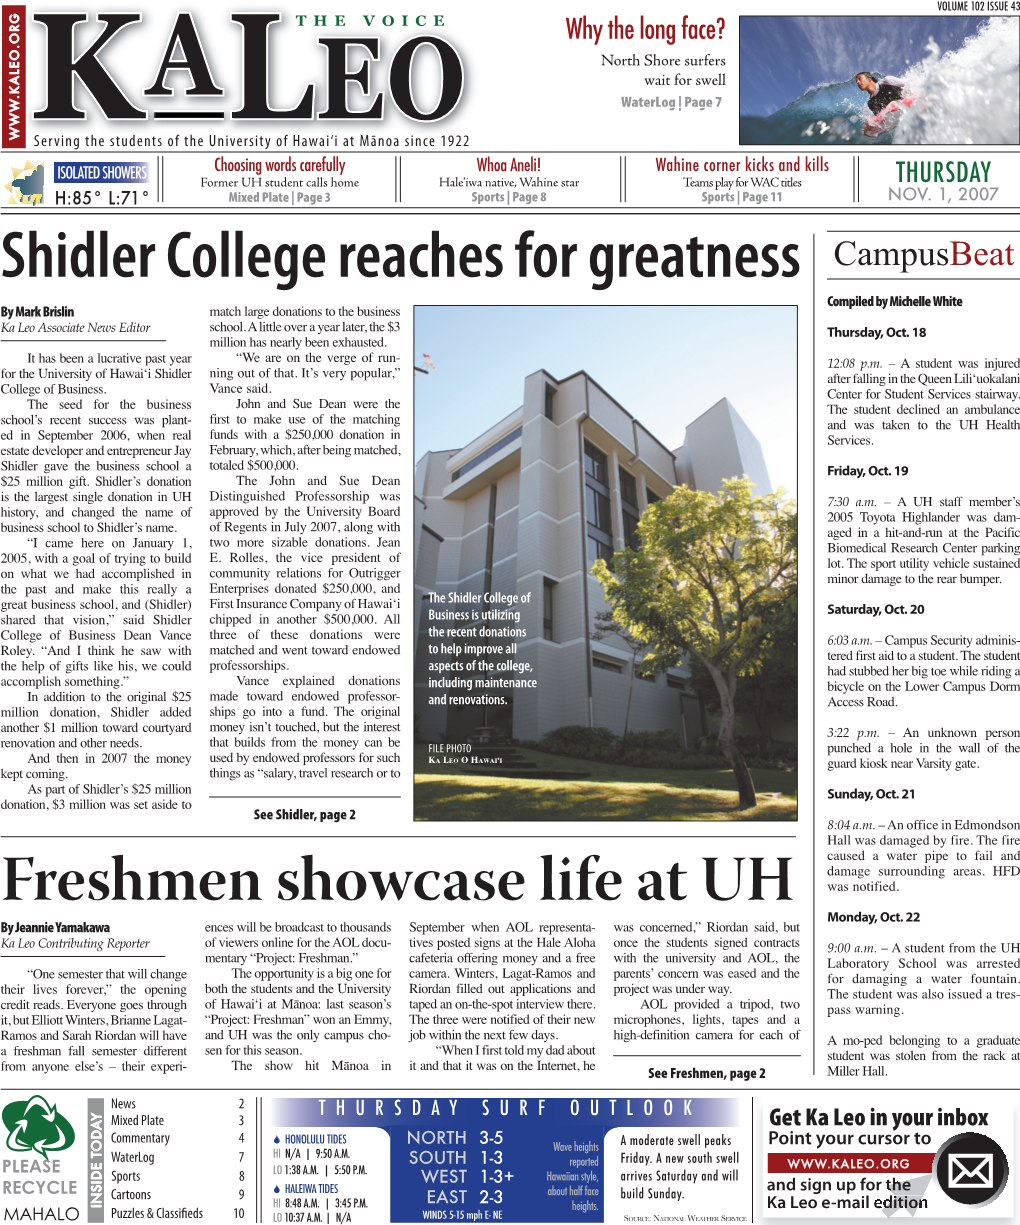 Shidler College Reaches for Greatness Campusbeat Compiled by Michelle White by Mark Brislin Match Large Donations to the Business Ka Leo Associate News Editor School